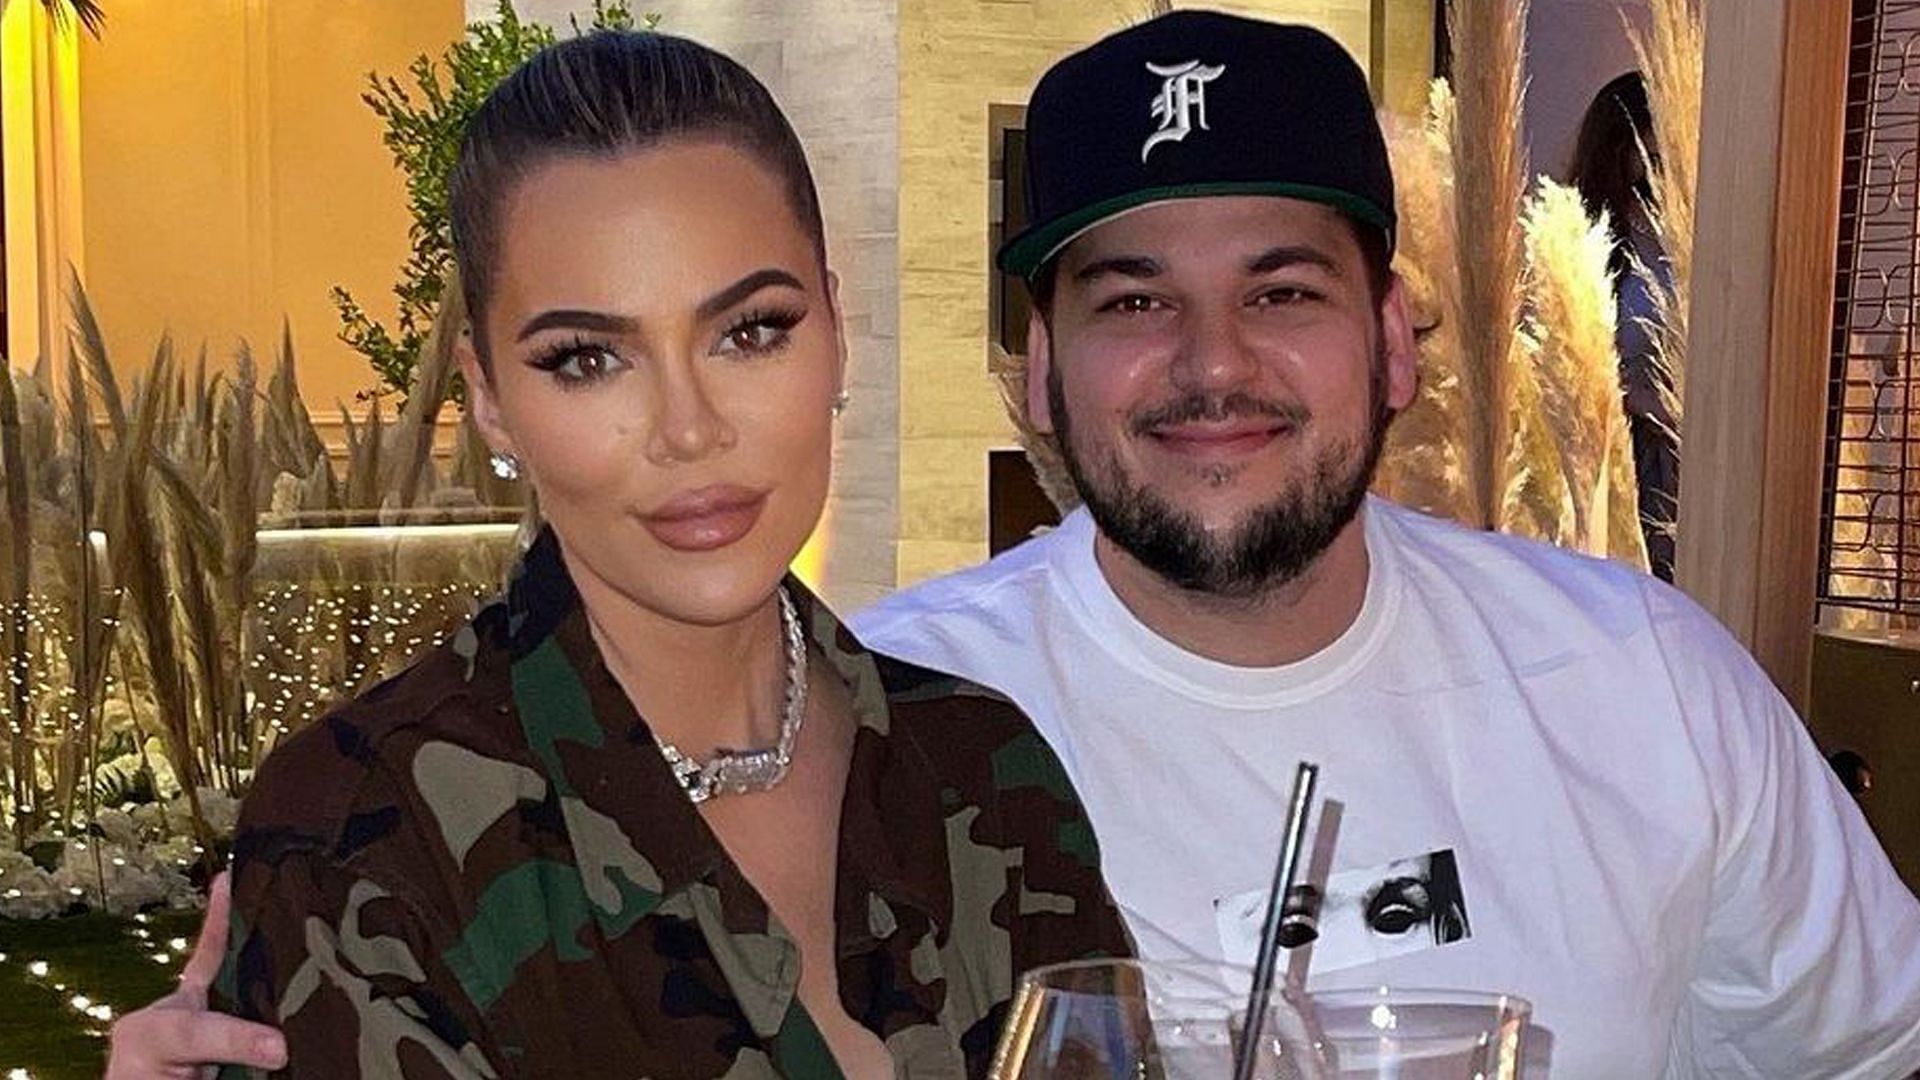 Rob Kardashian Through the Years: From Reality Star to Sock